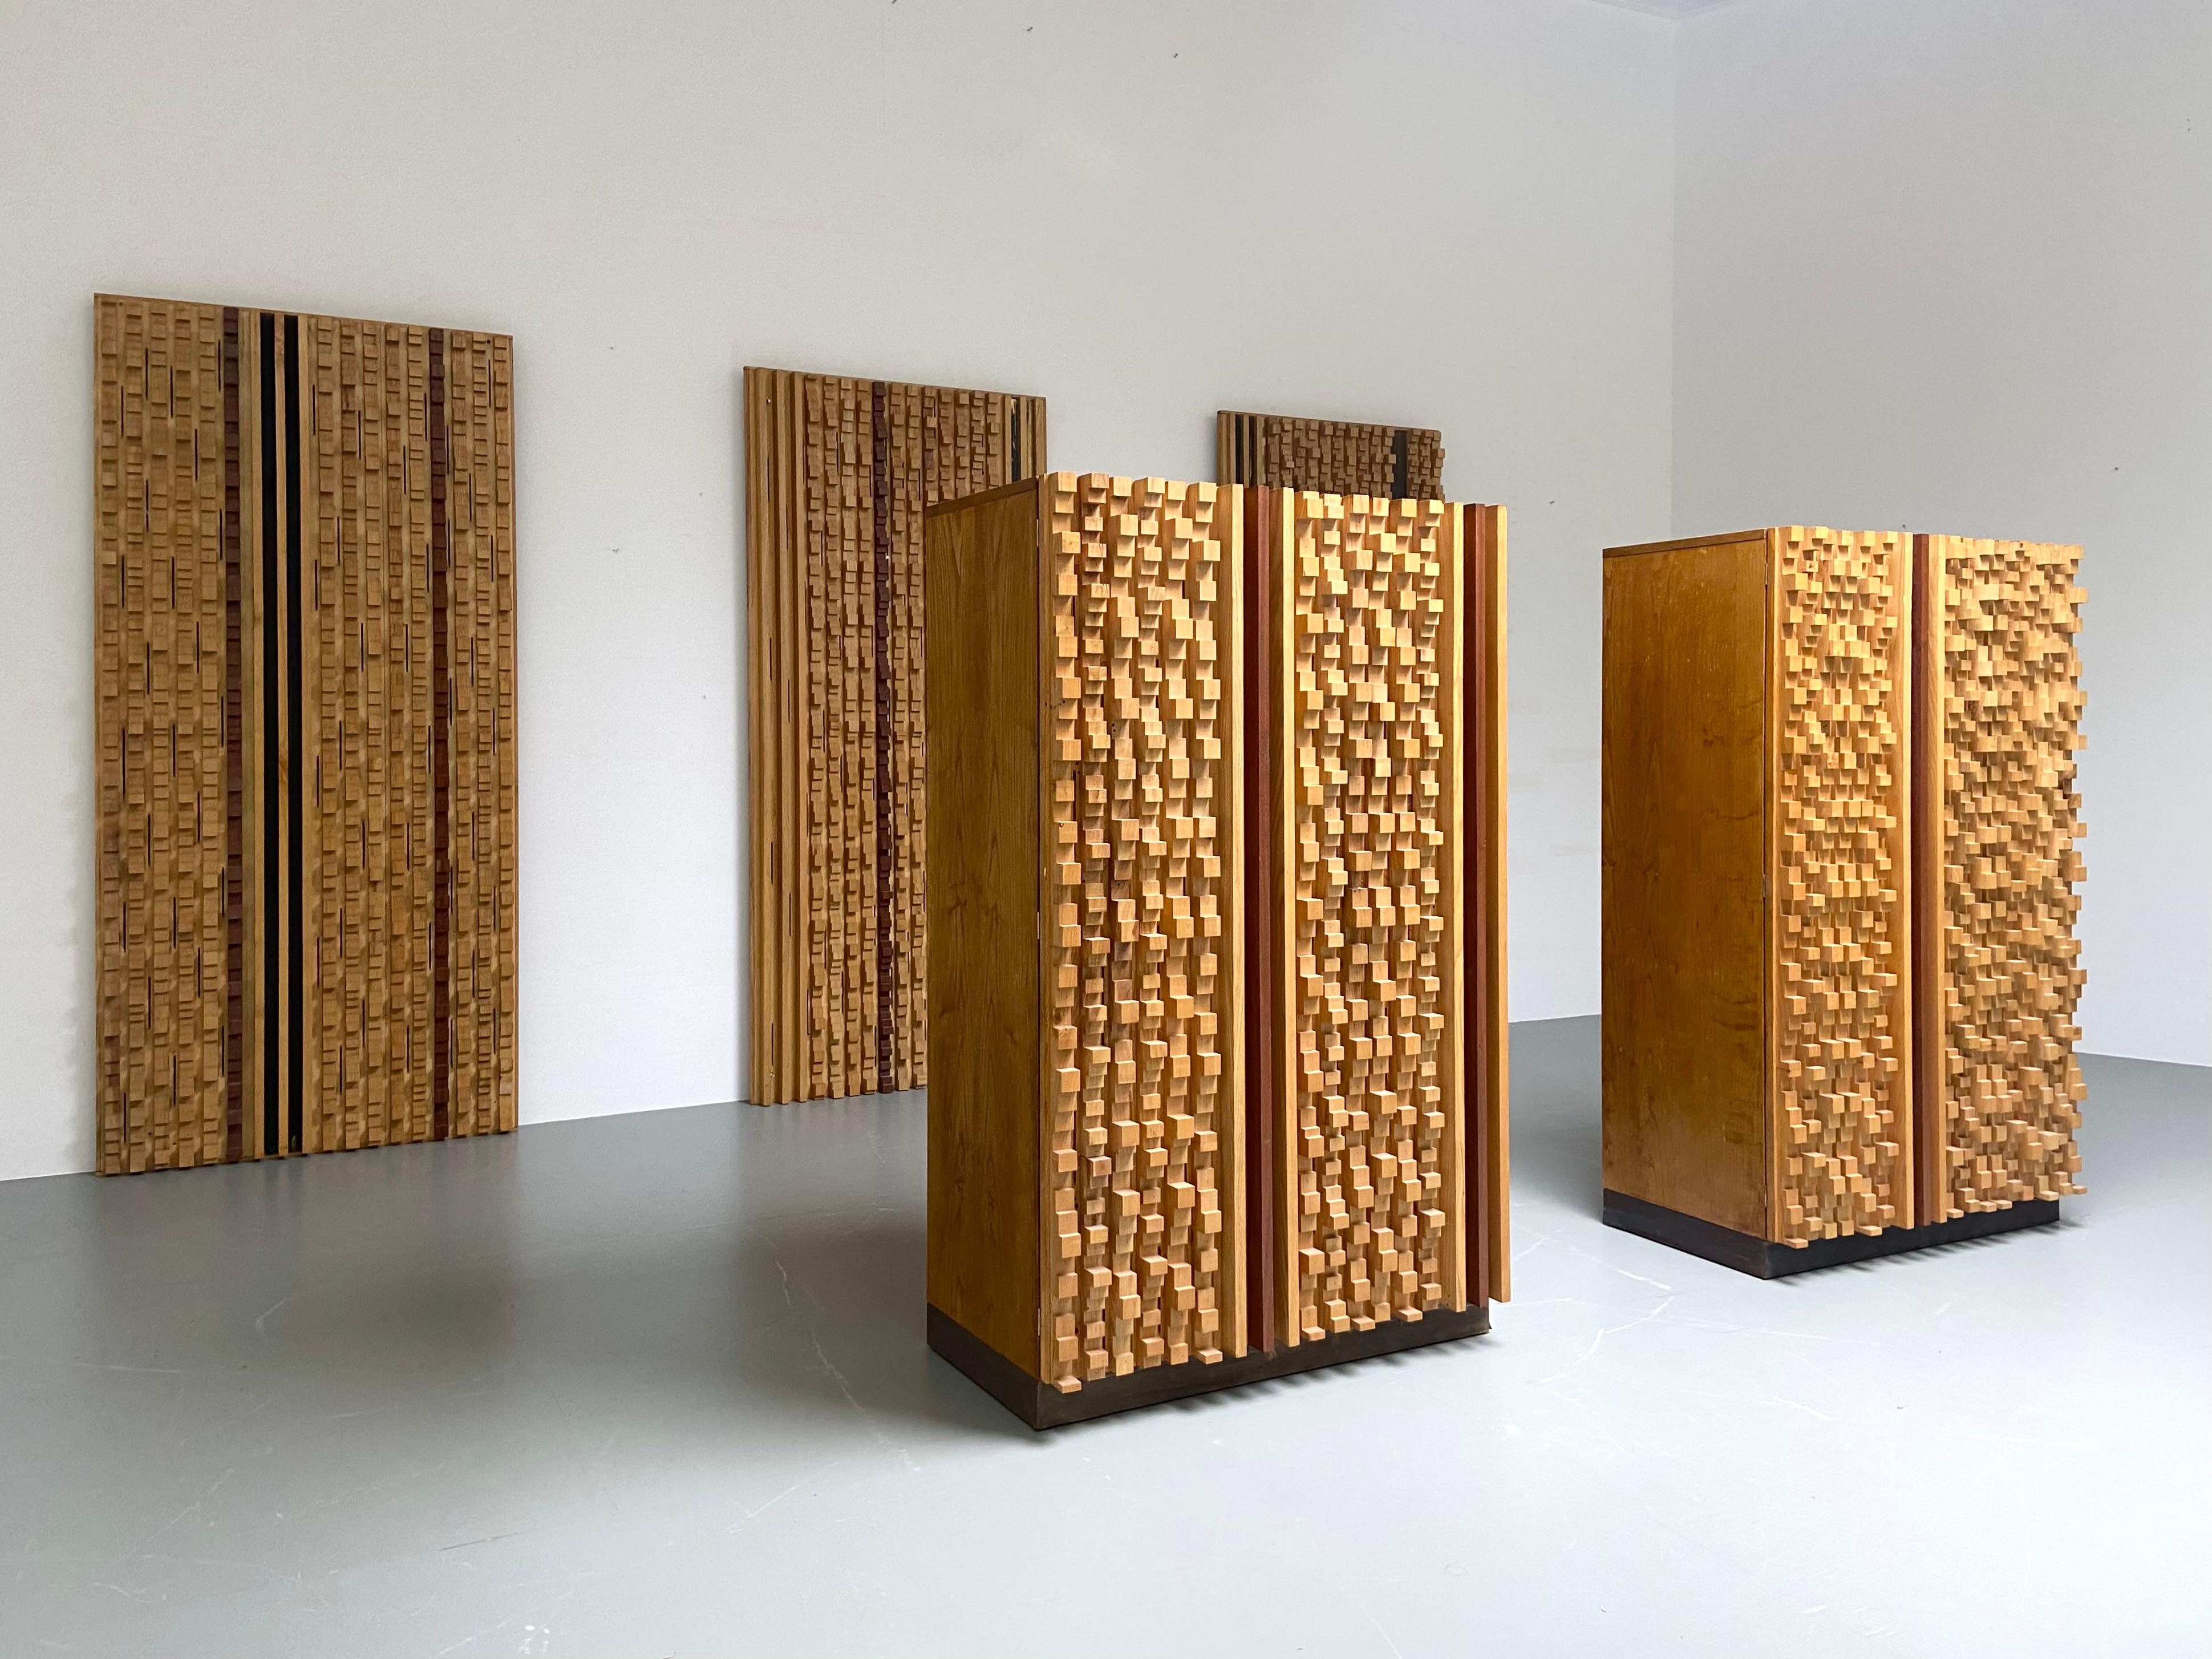 Set of 2 Cabinets and 3 Wall Panels by Stefano d'Amico, Italy, 1974 For Sale 4